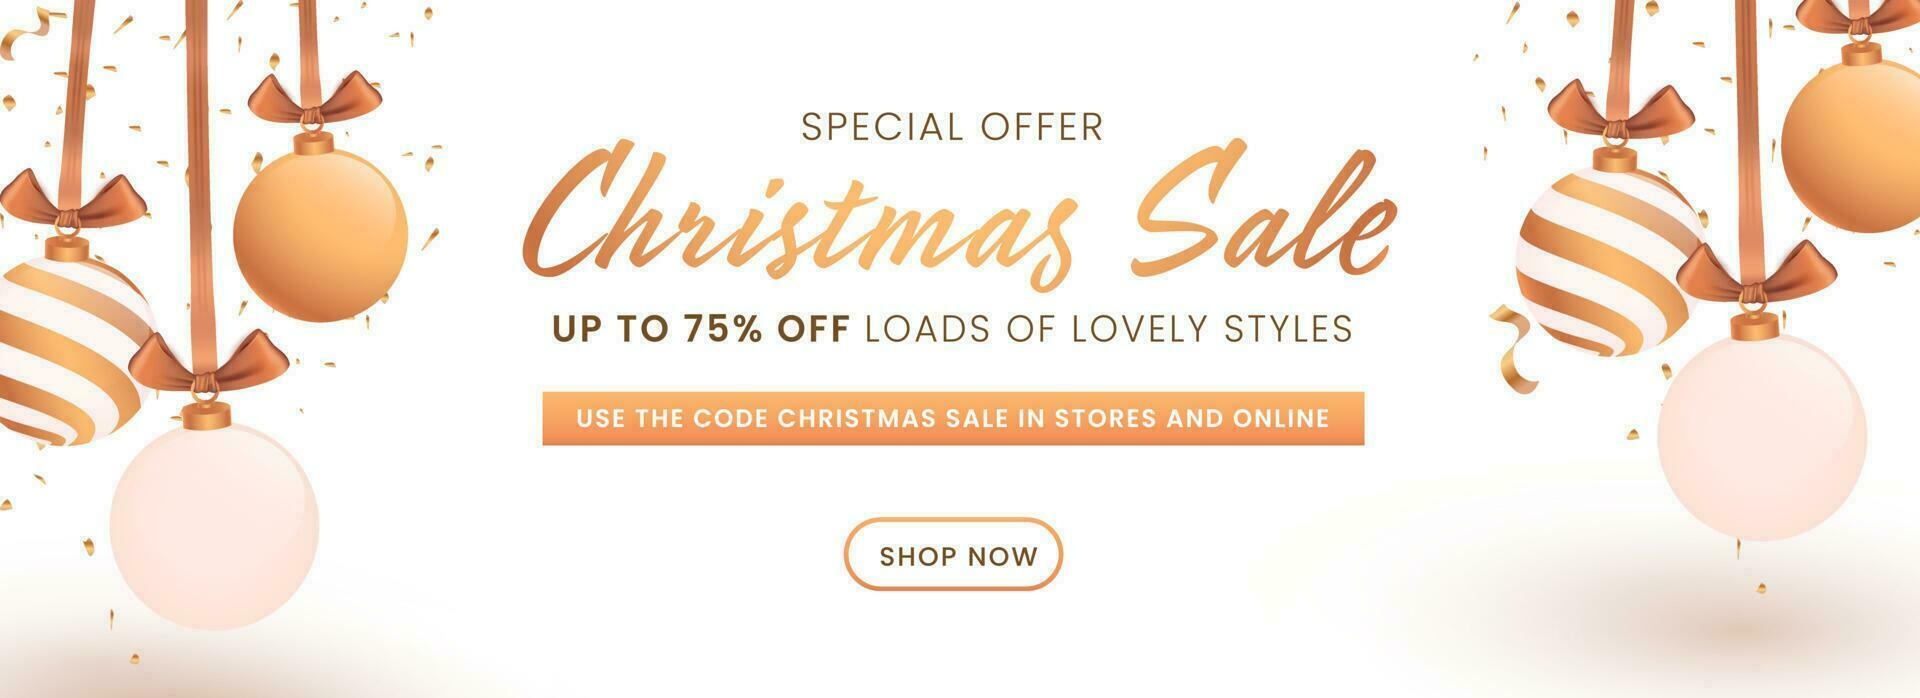 UP TO 75 Off For Christmas Sale Header Or Banner Design Decorated With Hanging Baubles. vector